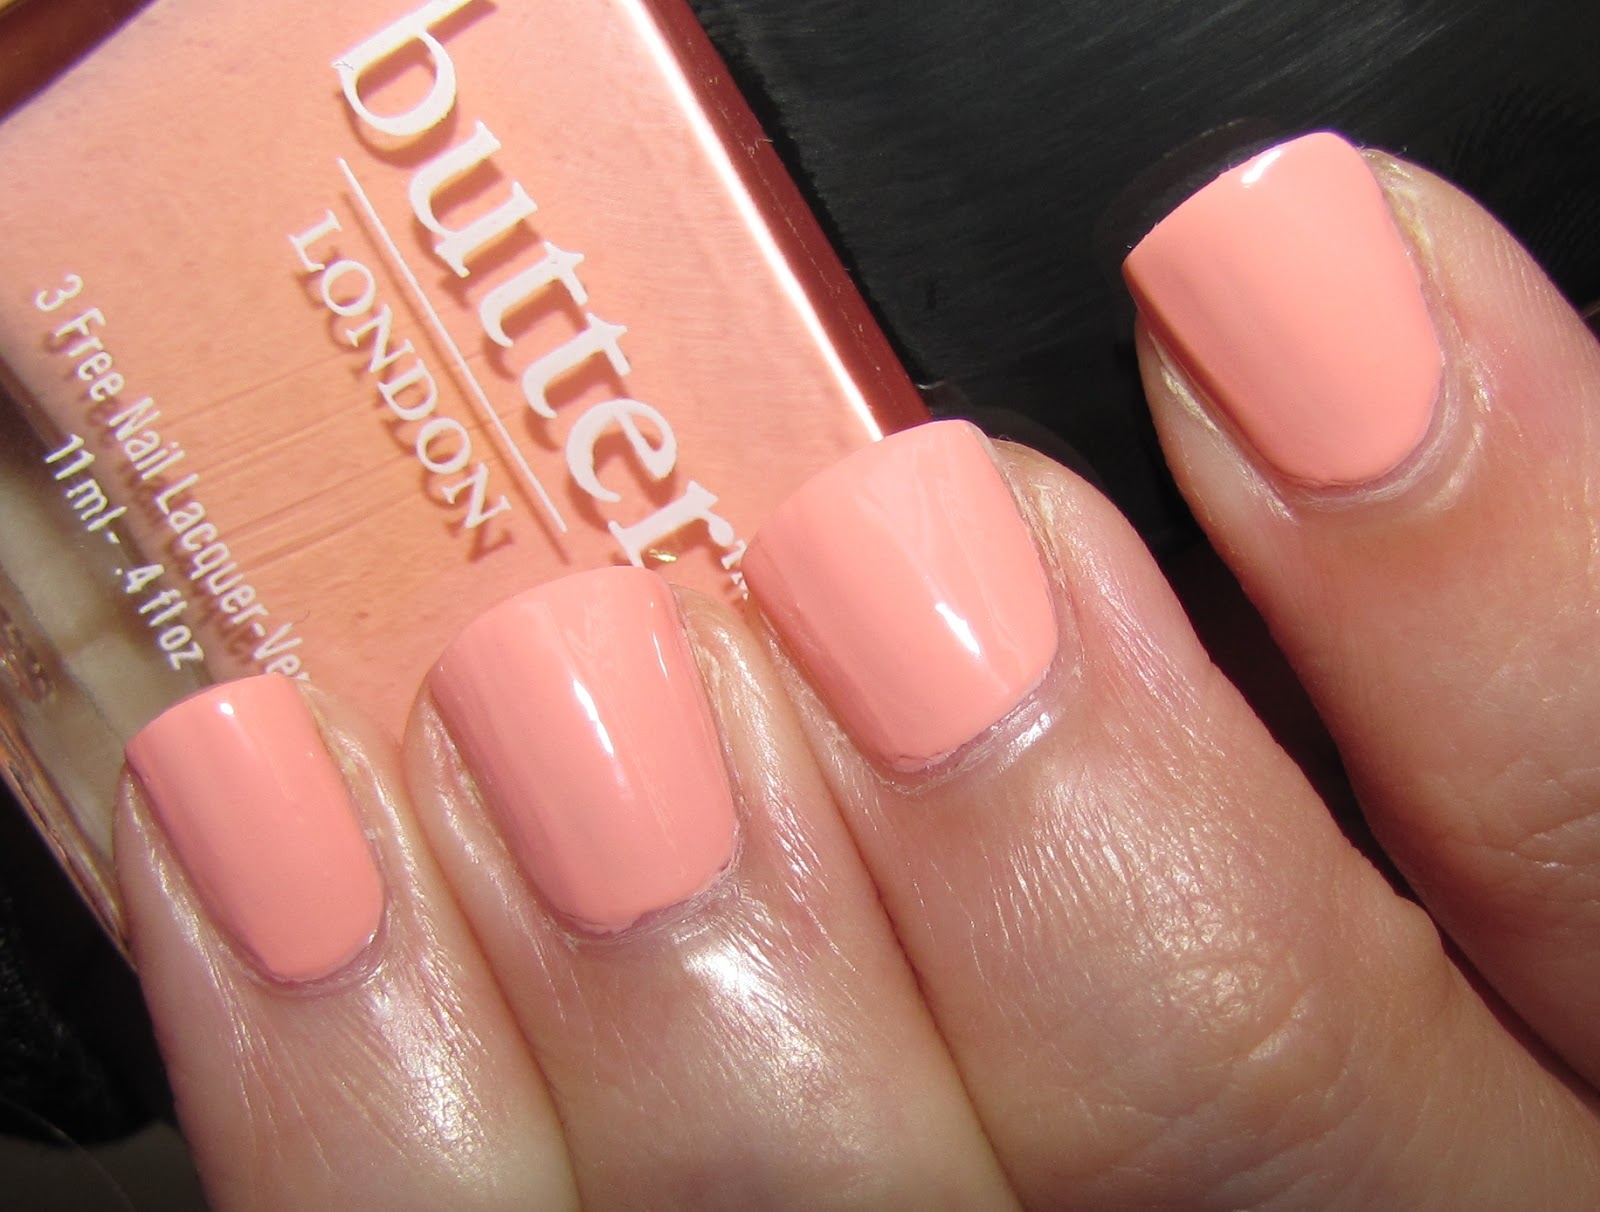 9. Butter London Nail Lacquer in "Fiver" - wide 9